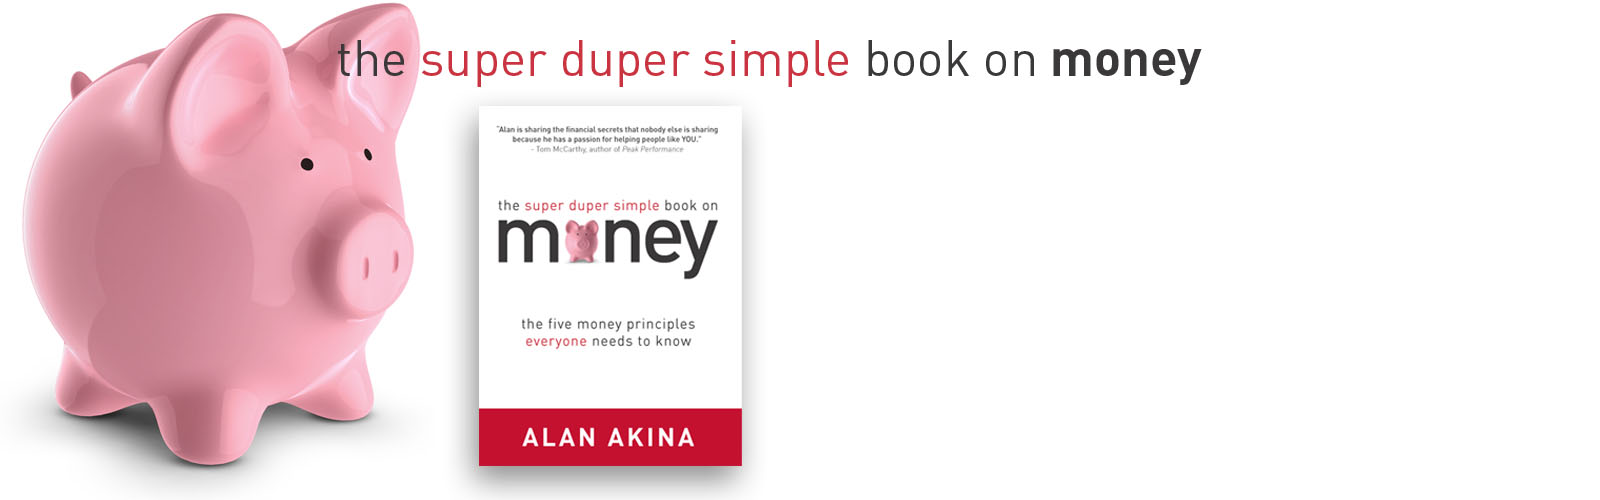 FREE eBOOK: THE SUPER DUPER SIMPLE BOOK ON MONEY